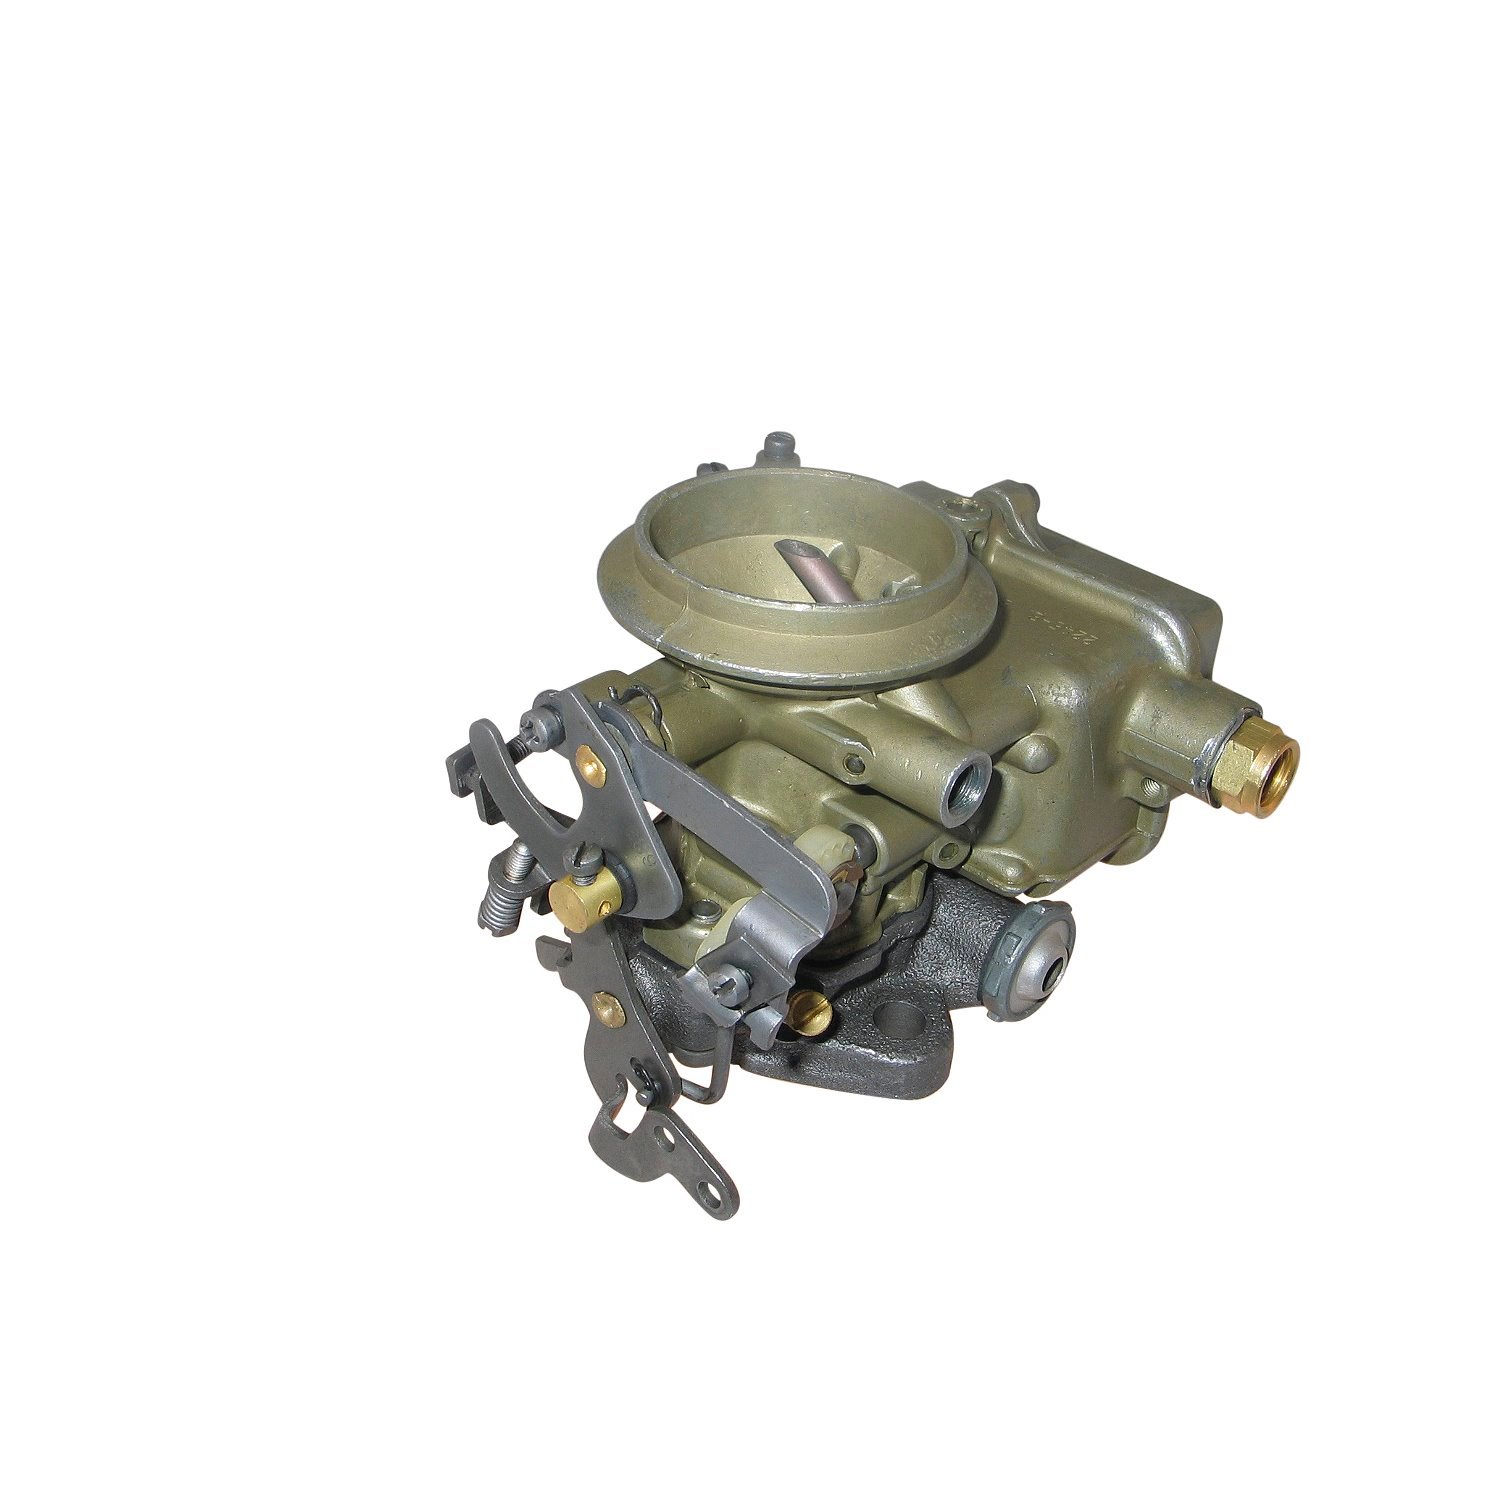 7-794 Holley Remanufactured Carburetor, 1920-Style